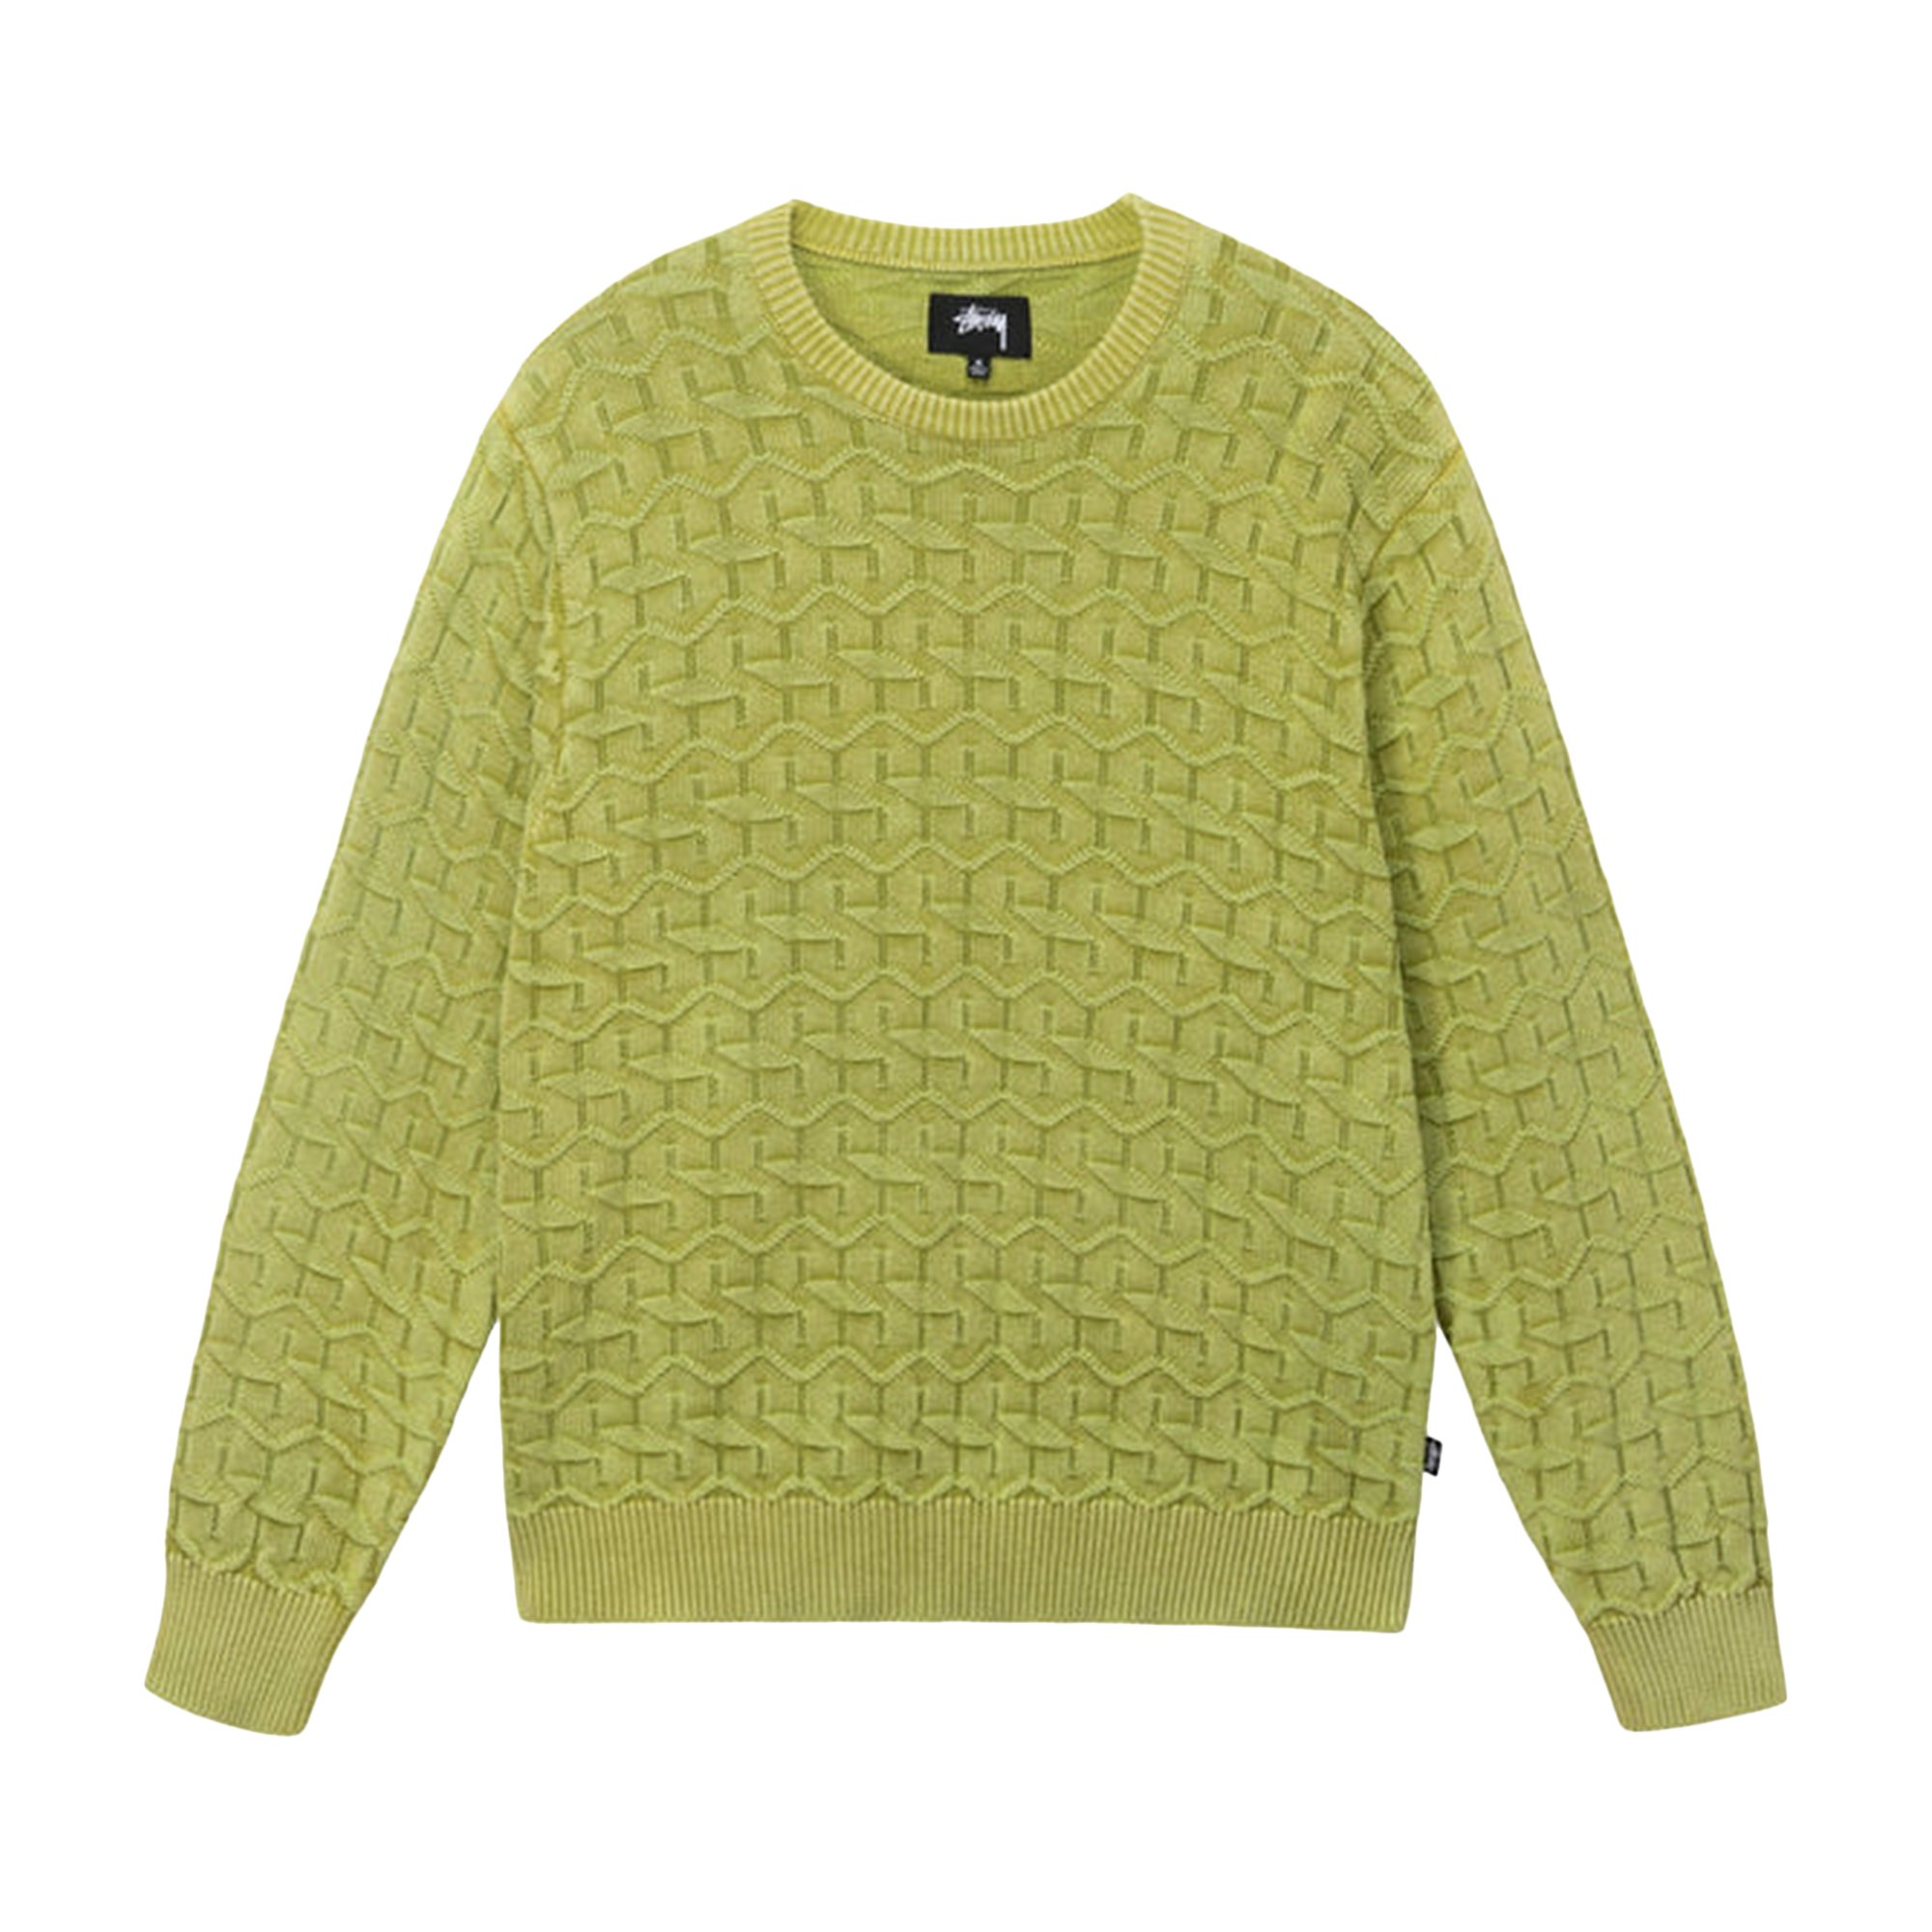 STUSSY CURLY S SWEATER NATURAL SIZE M - ニット/セーター